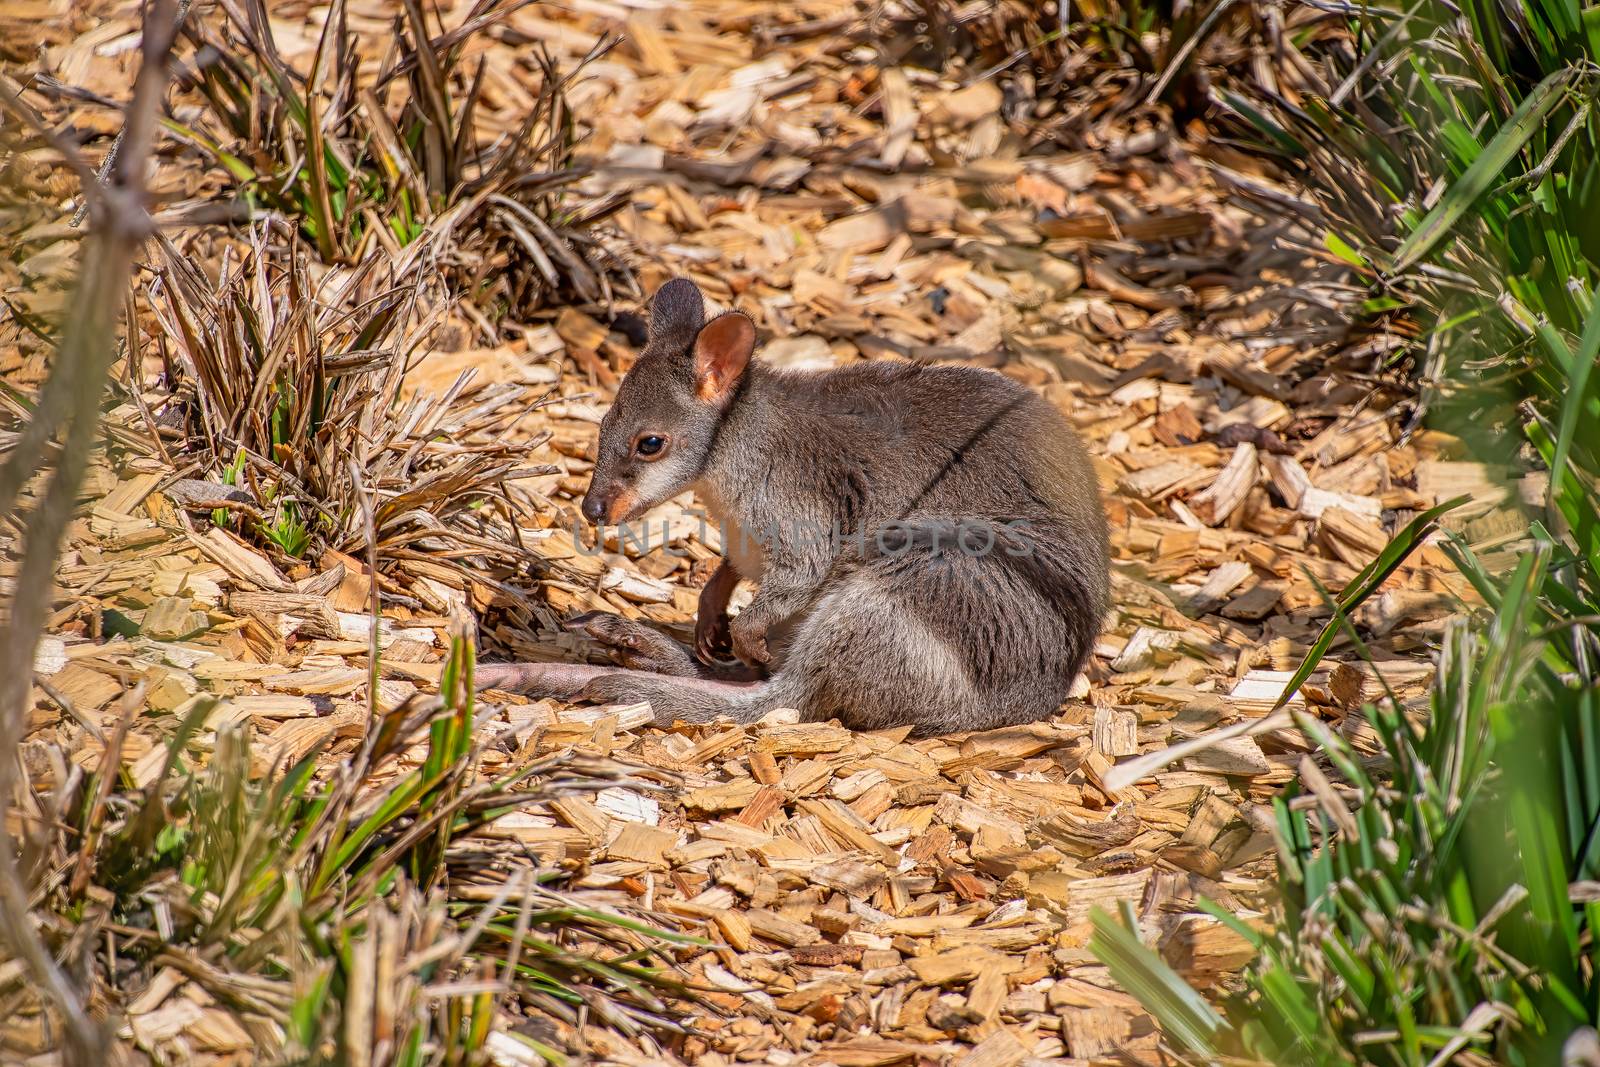 Baby Dusky Pademelon - endangered also known as Dusky Wallaby